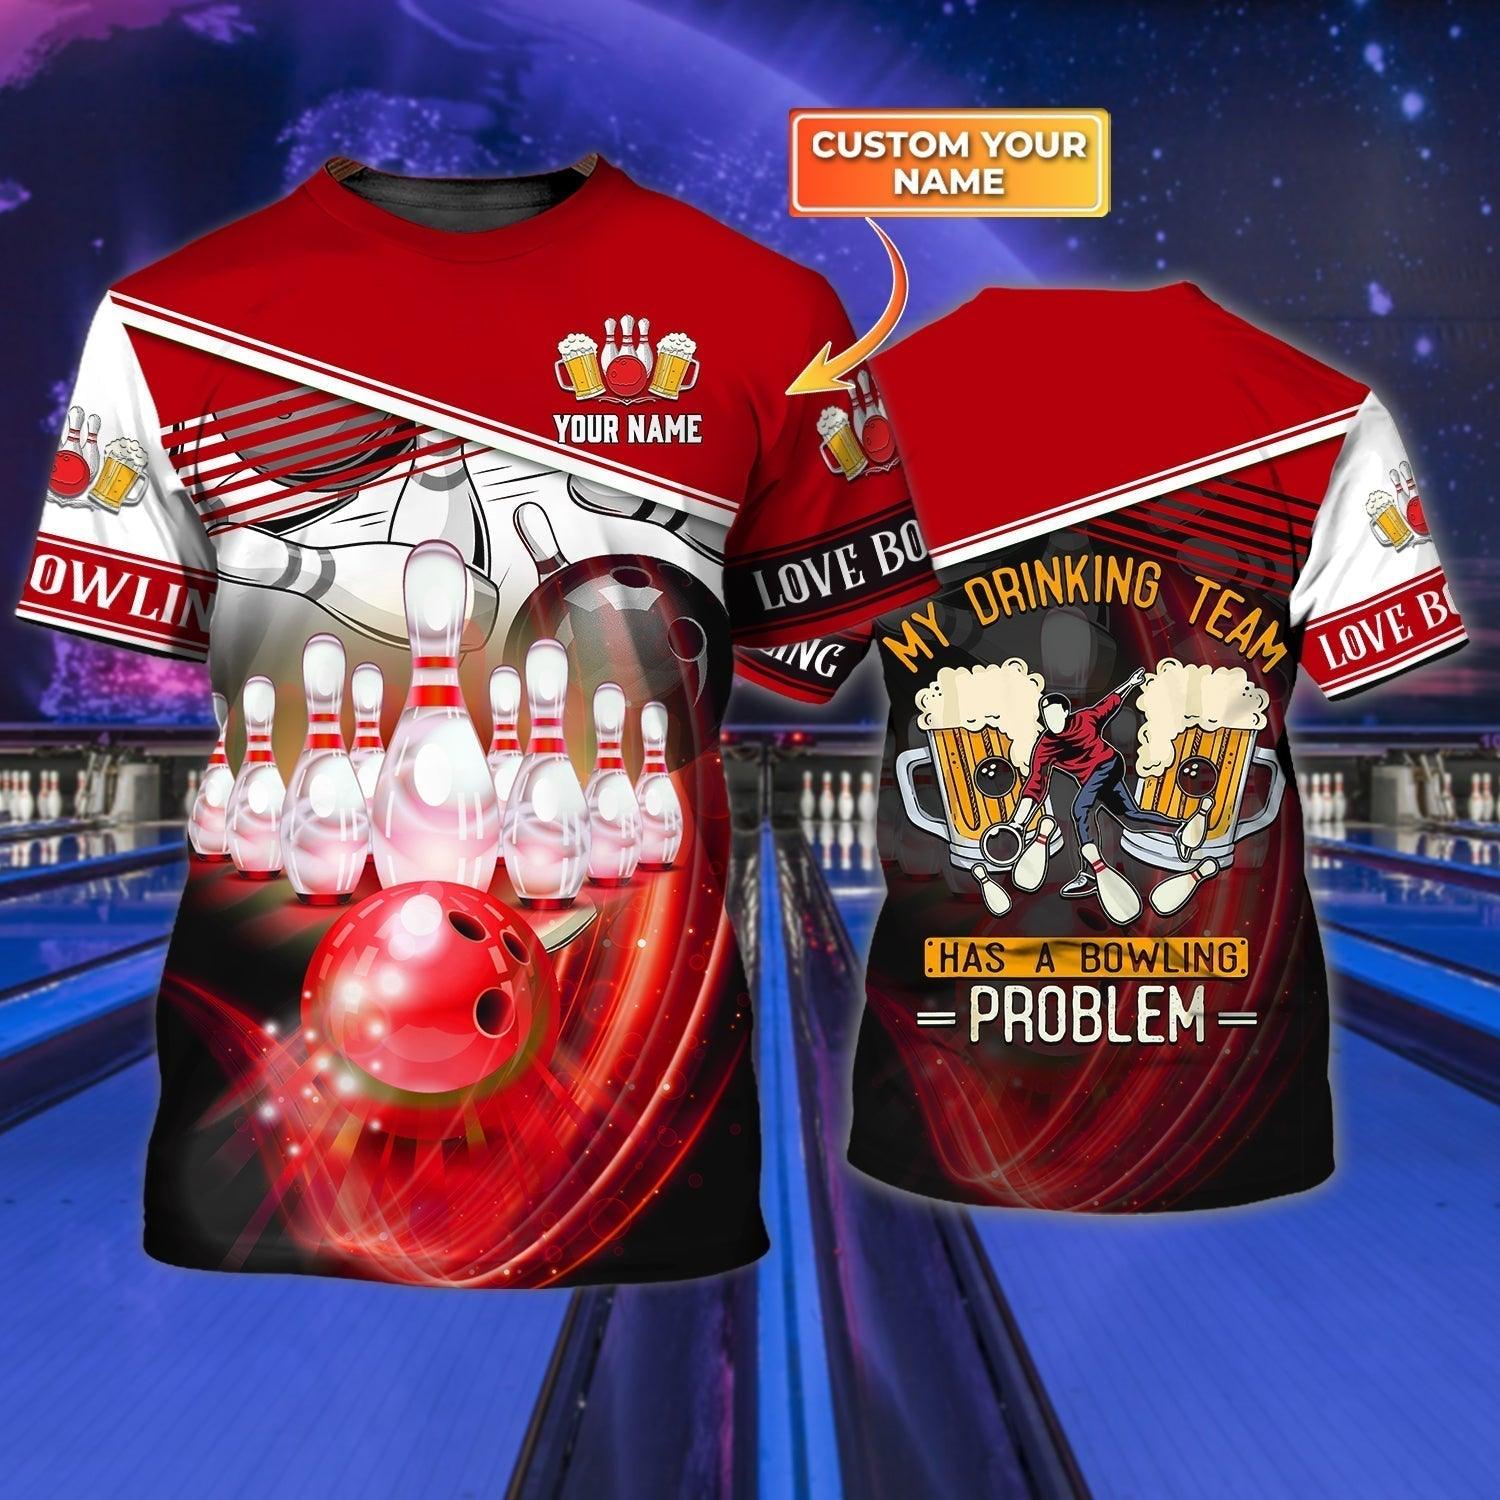 Customized 3D Red Bowling T Shirt, Personalized Bowling And Beer T Shirts, Love Bowling Shirts - Best Gift For Bowling Lovers, Bowlers - Amzanimalsgift